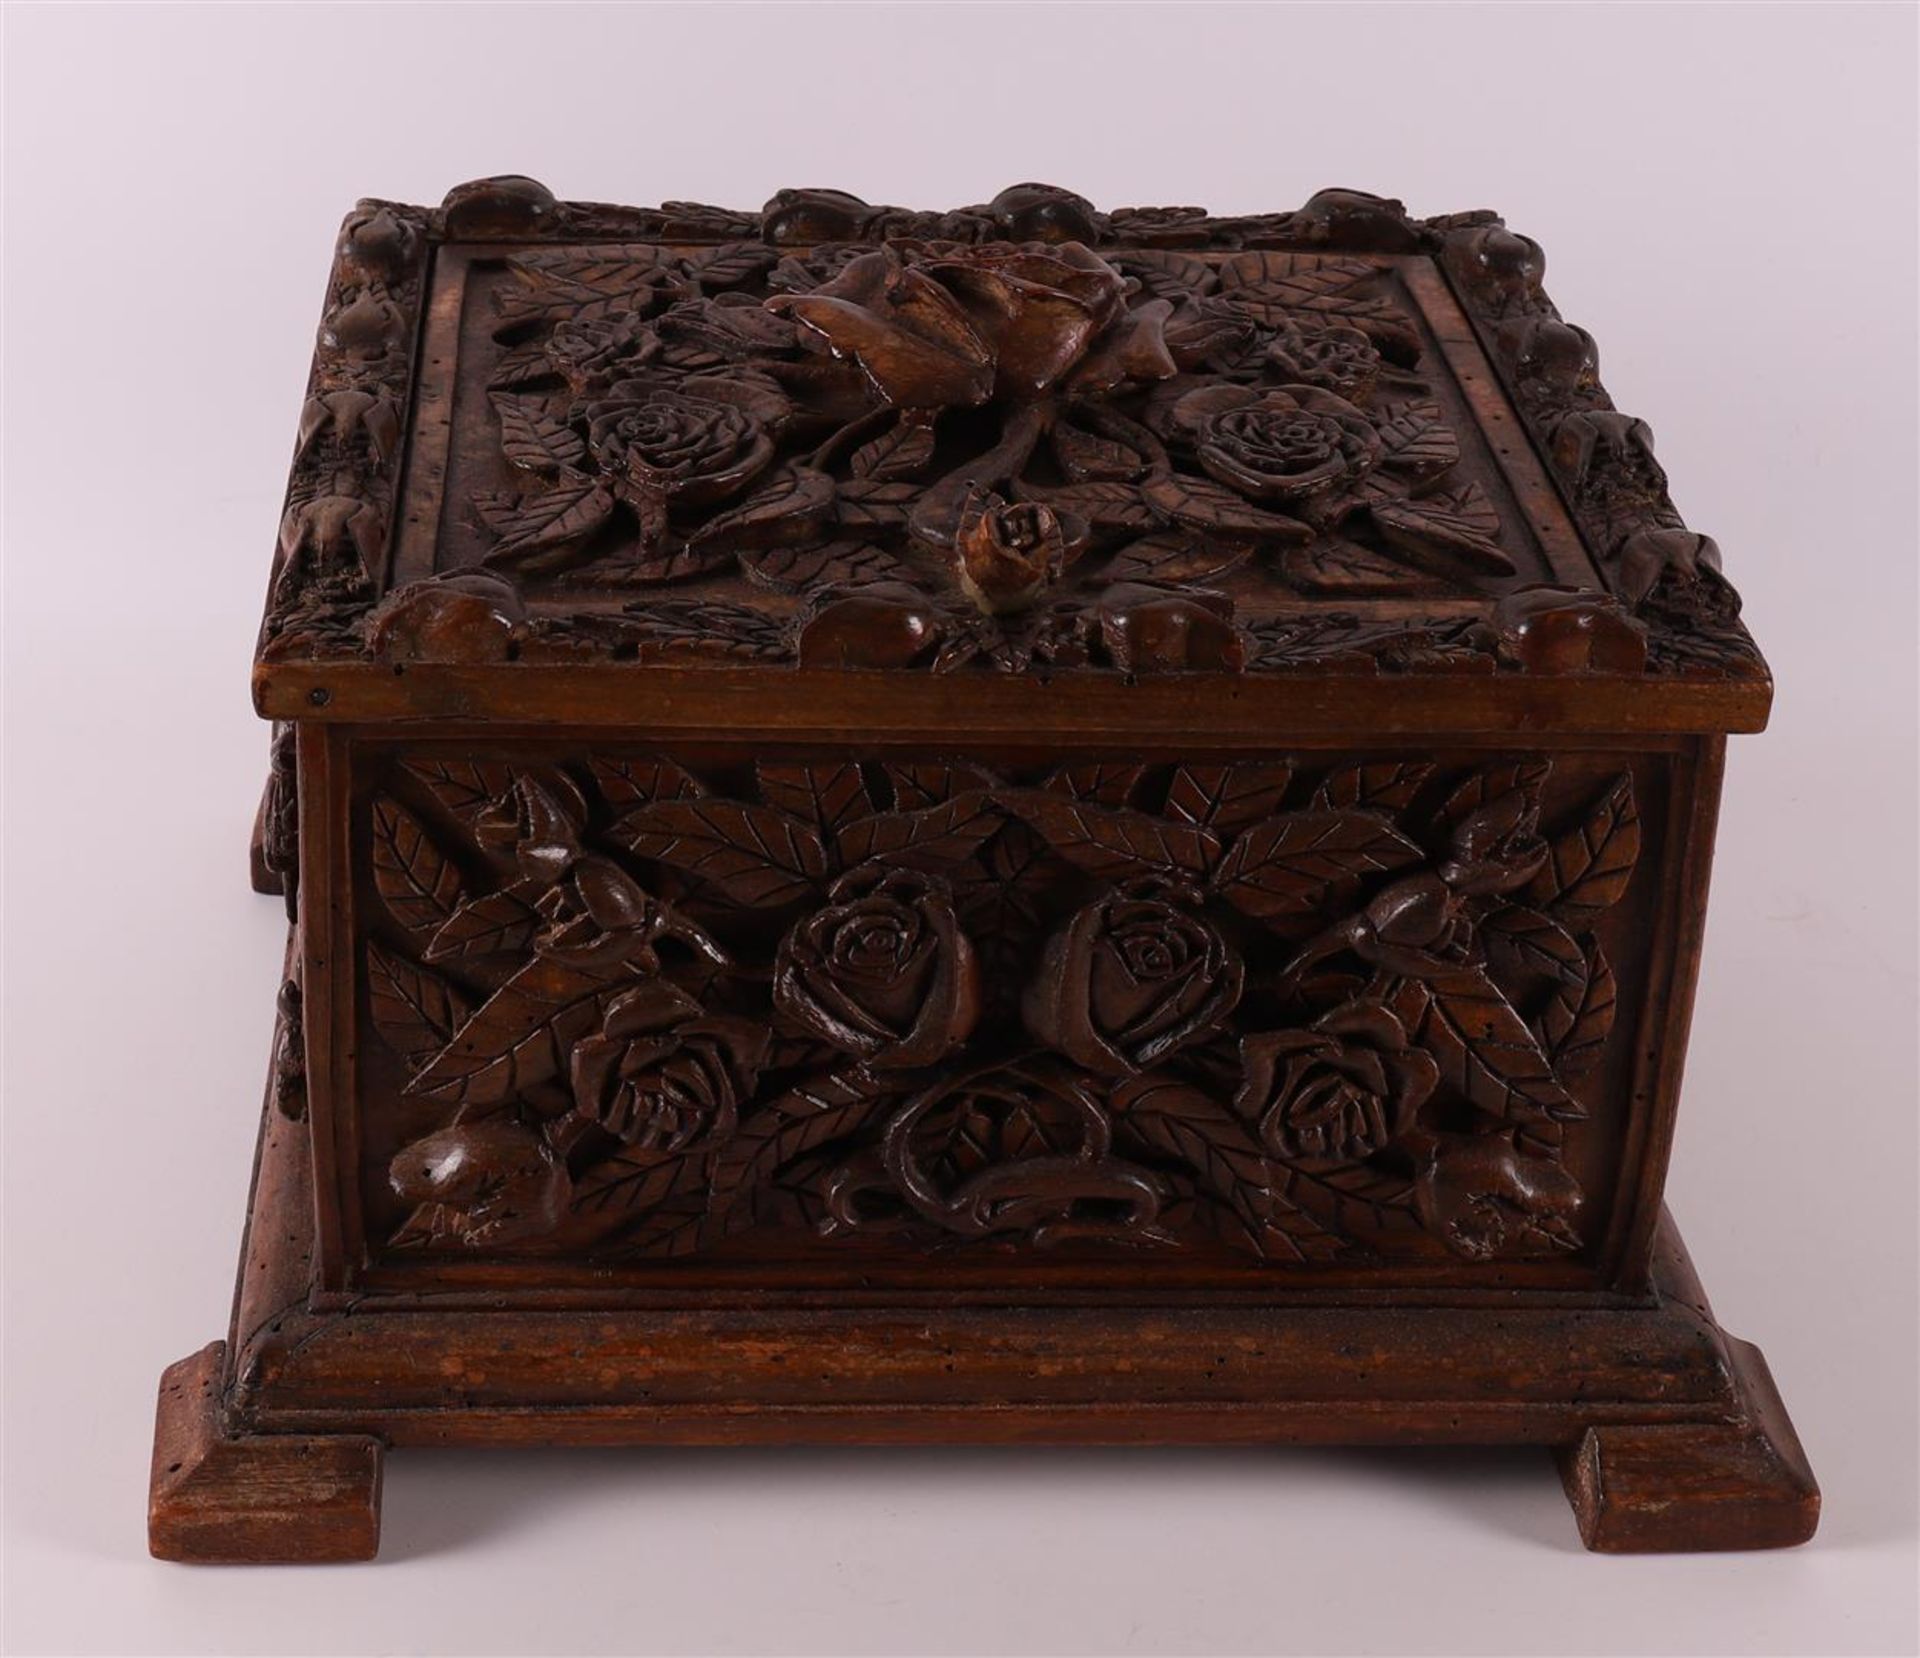 A carved wooden lidded box with relief decoration of roses, around 1900.